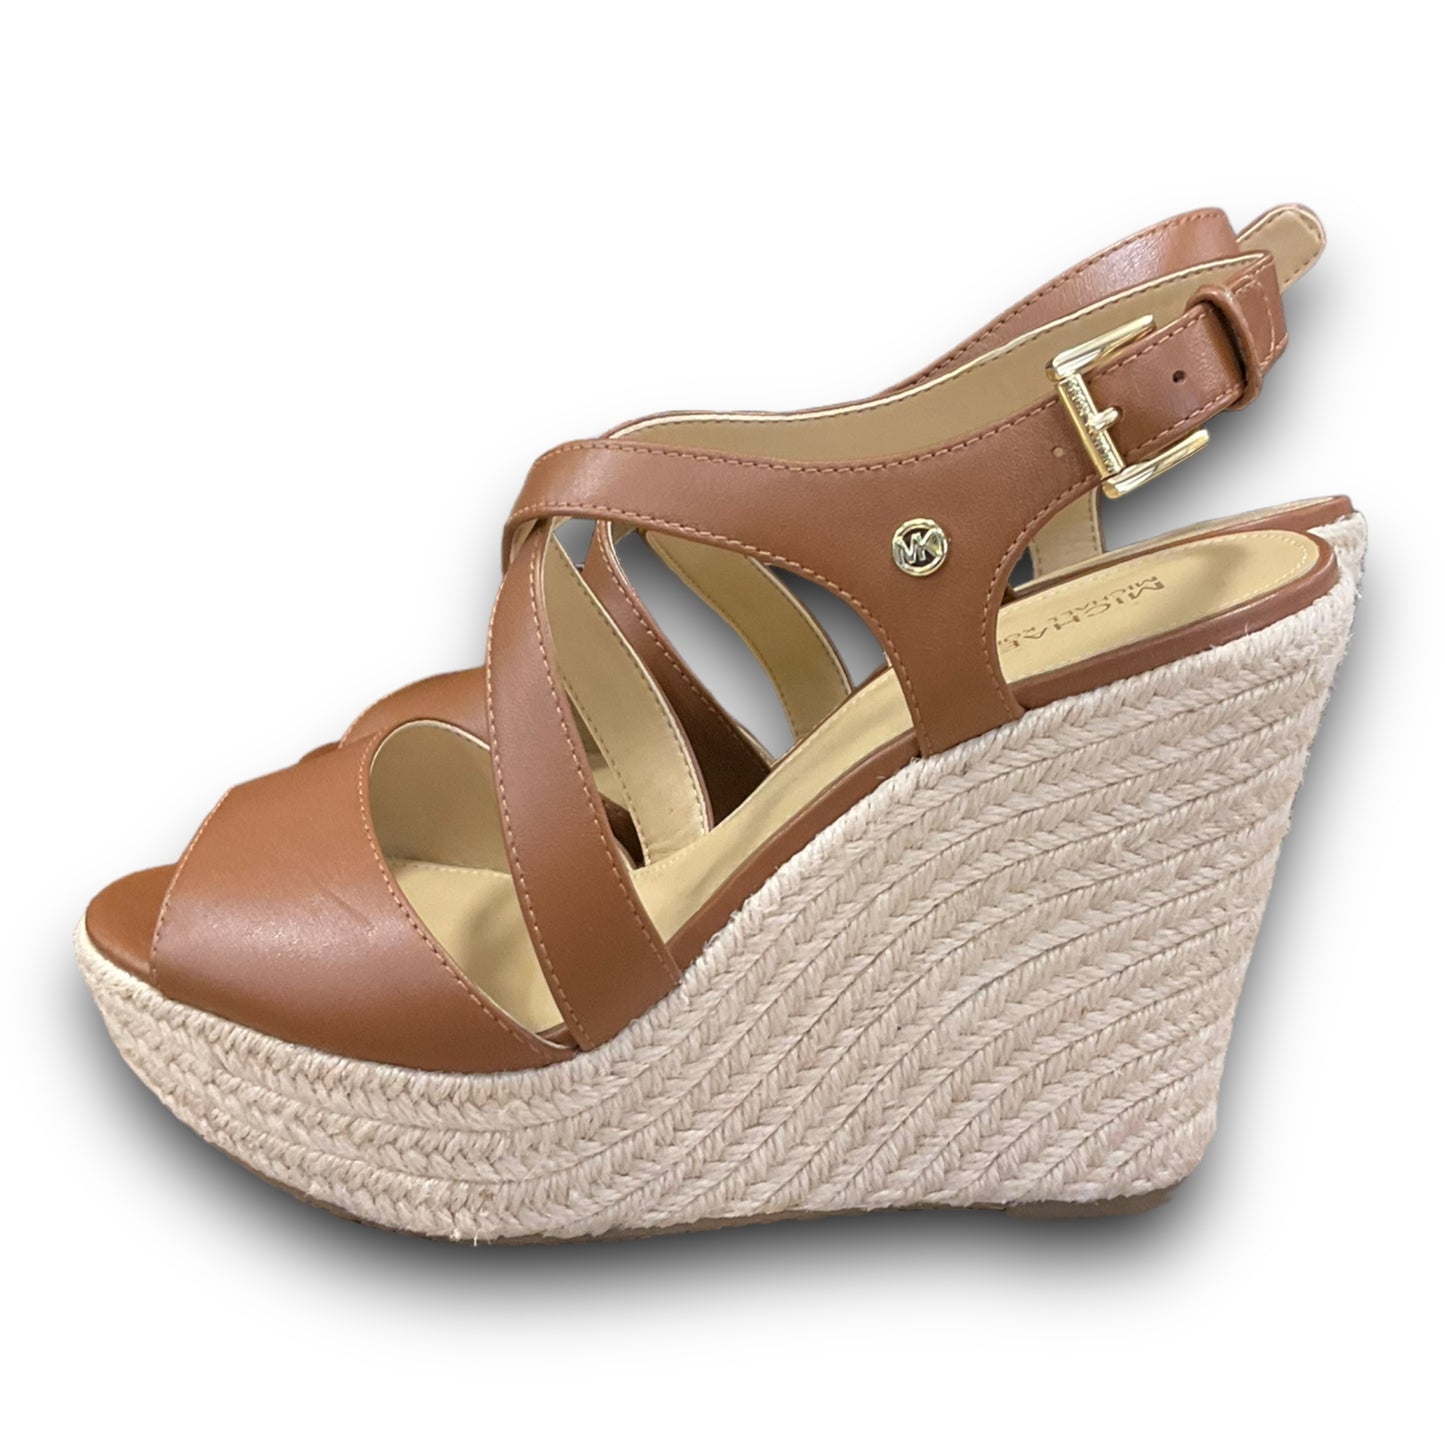 Shoes Heels Wedge By Michael By Michael Kors  Size: 8